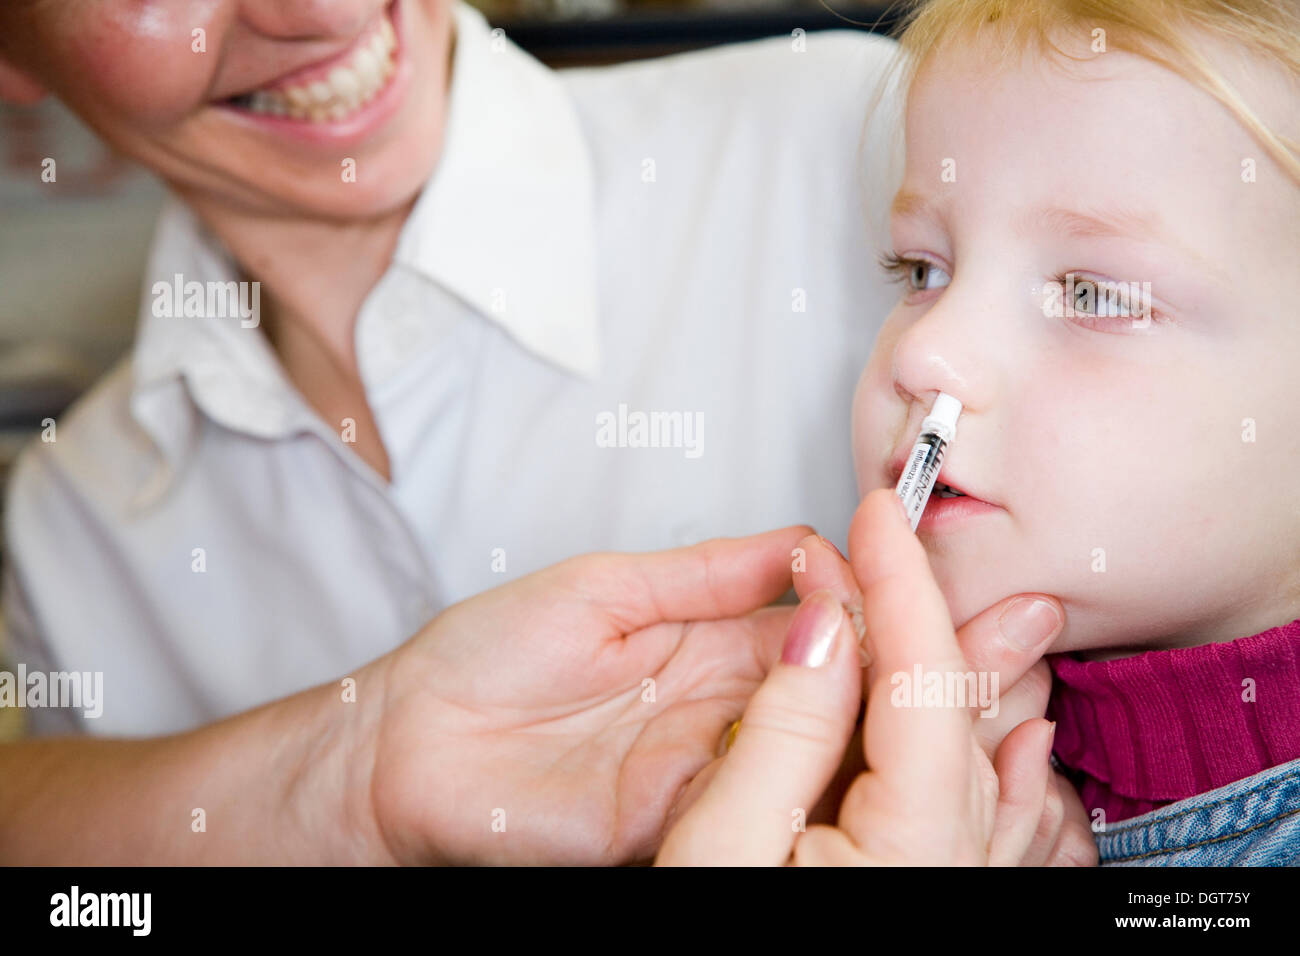 Three and a half year old child, accompanied by her mum / mother, receives a dose of the new flu vaccine - Fluenz - in the form of a nasal spray immunisation from her NHS GP Practice nurse. UK. Stock Photo